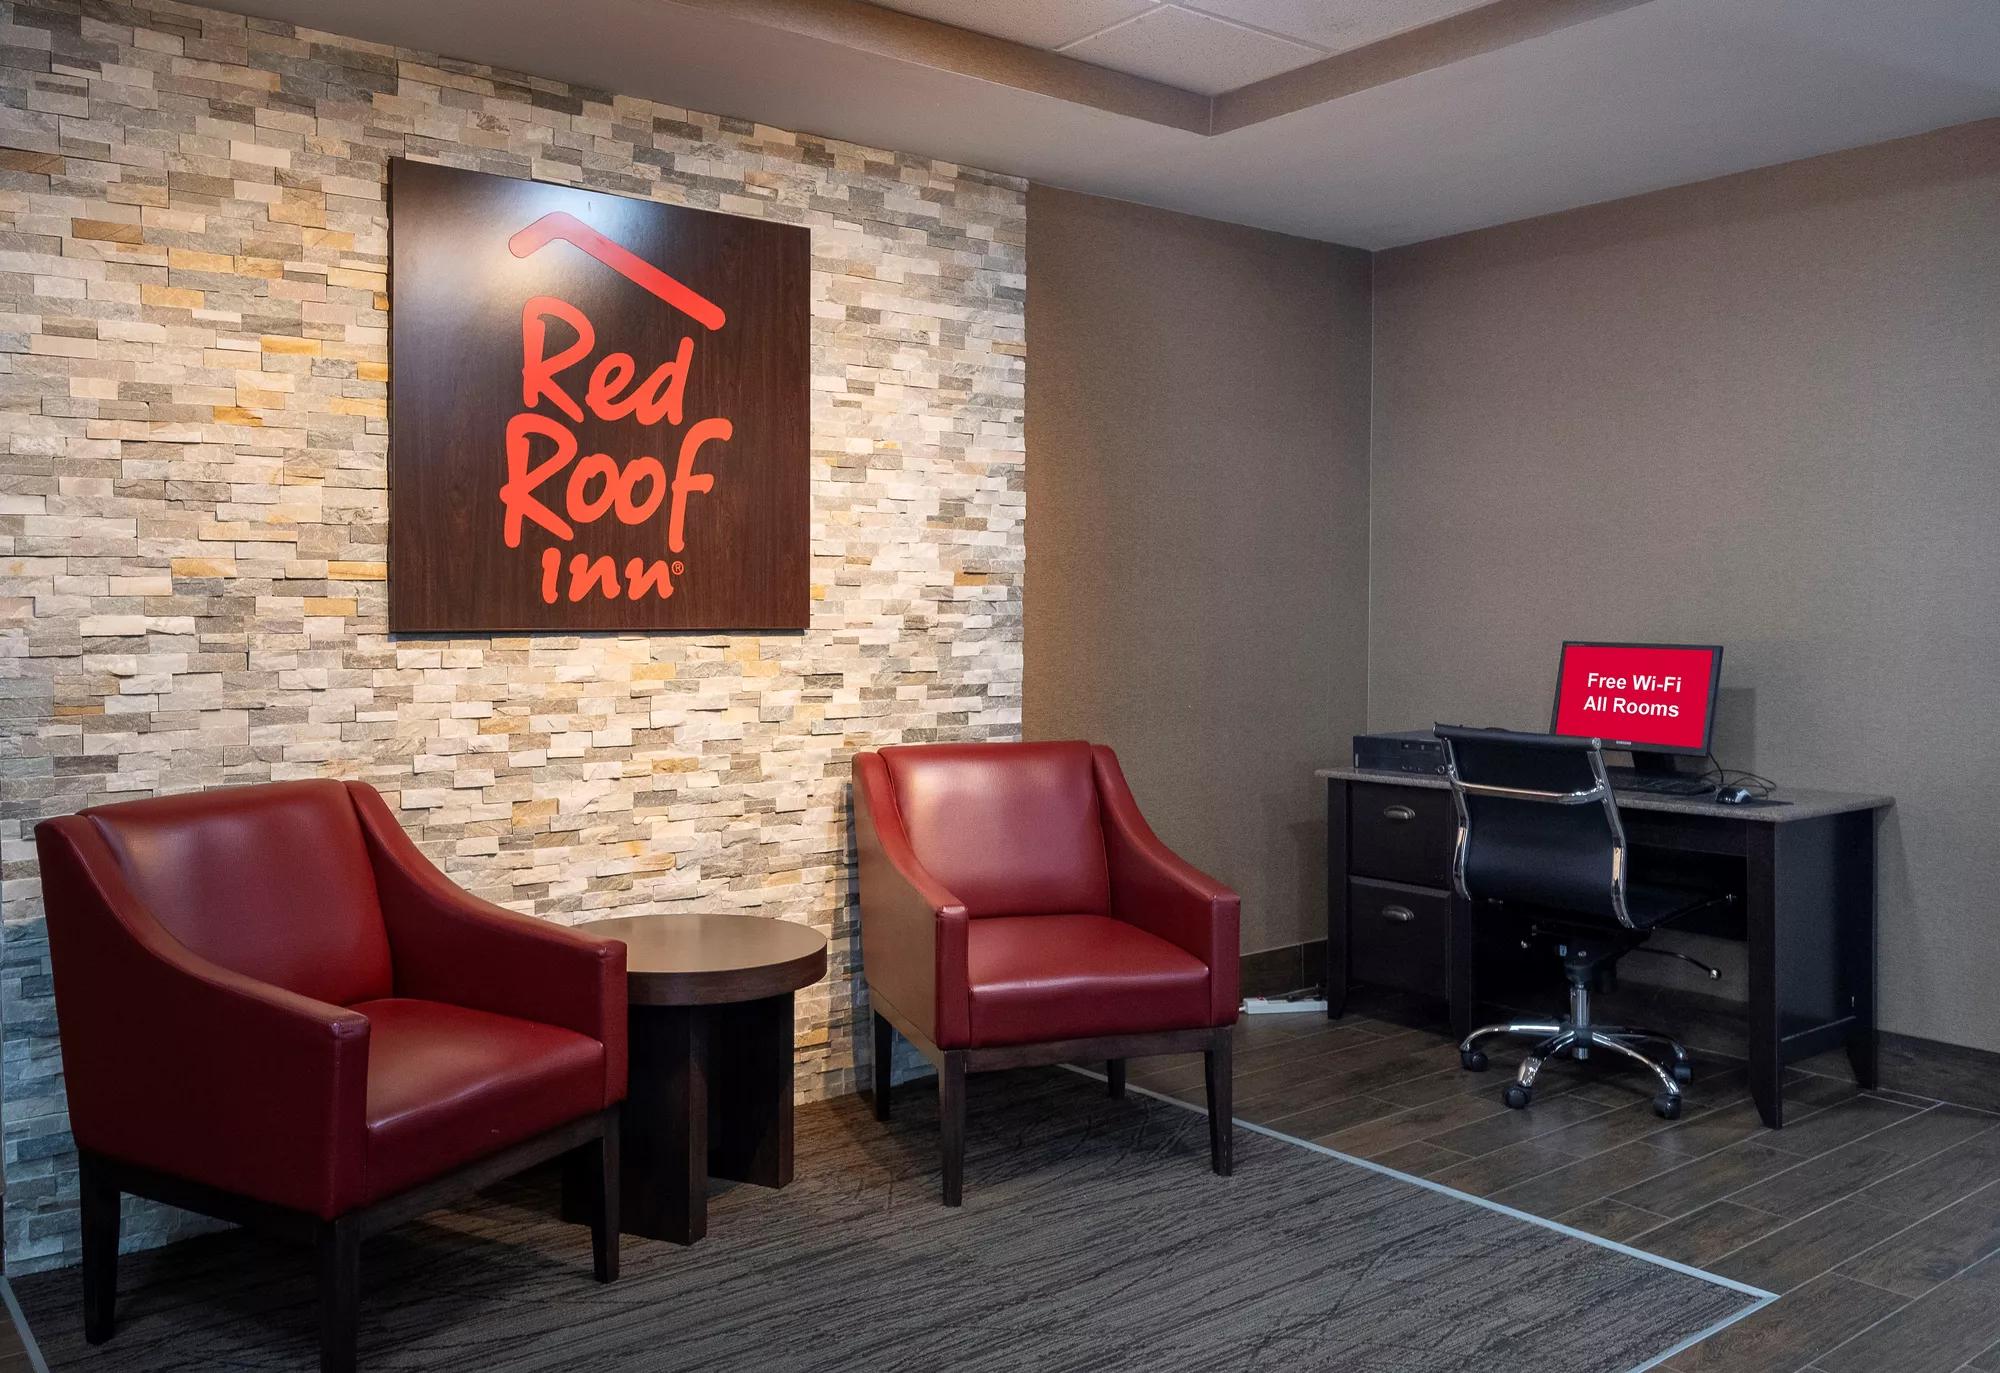 Red Roof Inn Prattville Lobby Sitting Area and Business Center Image Details